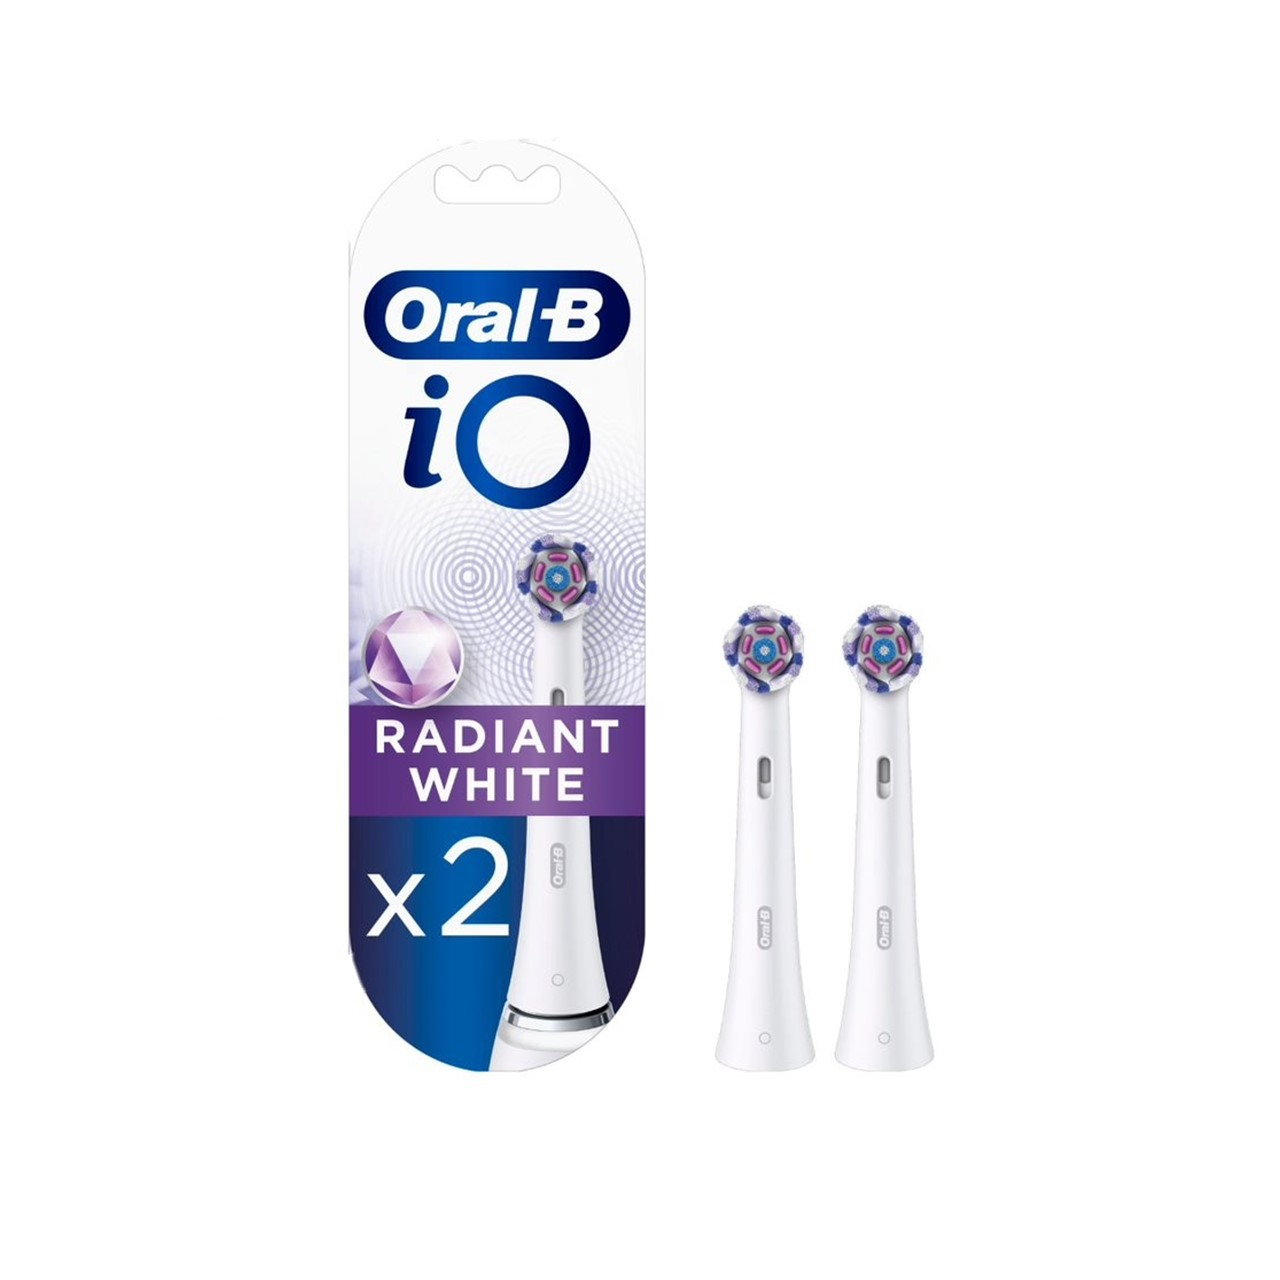 Oral-B iO Radiant White Replacement Head Electric Toothbrush White x2